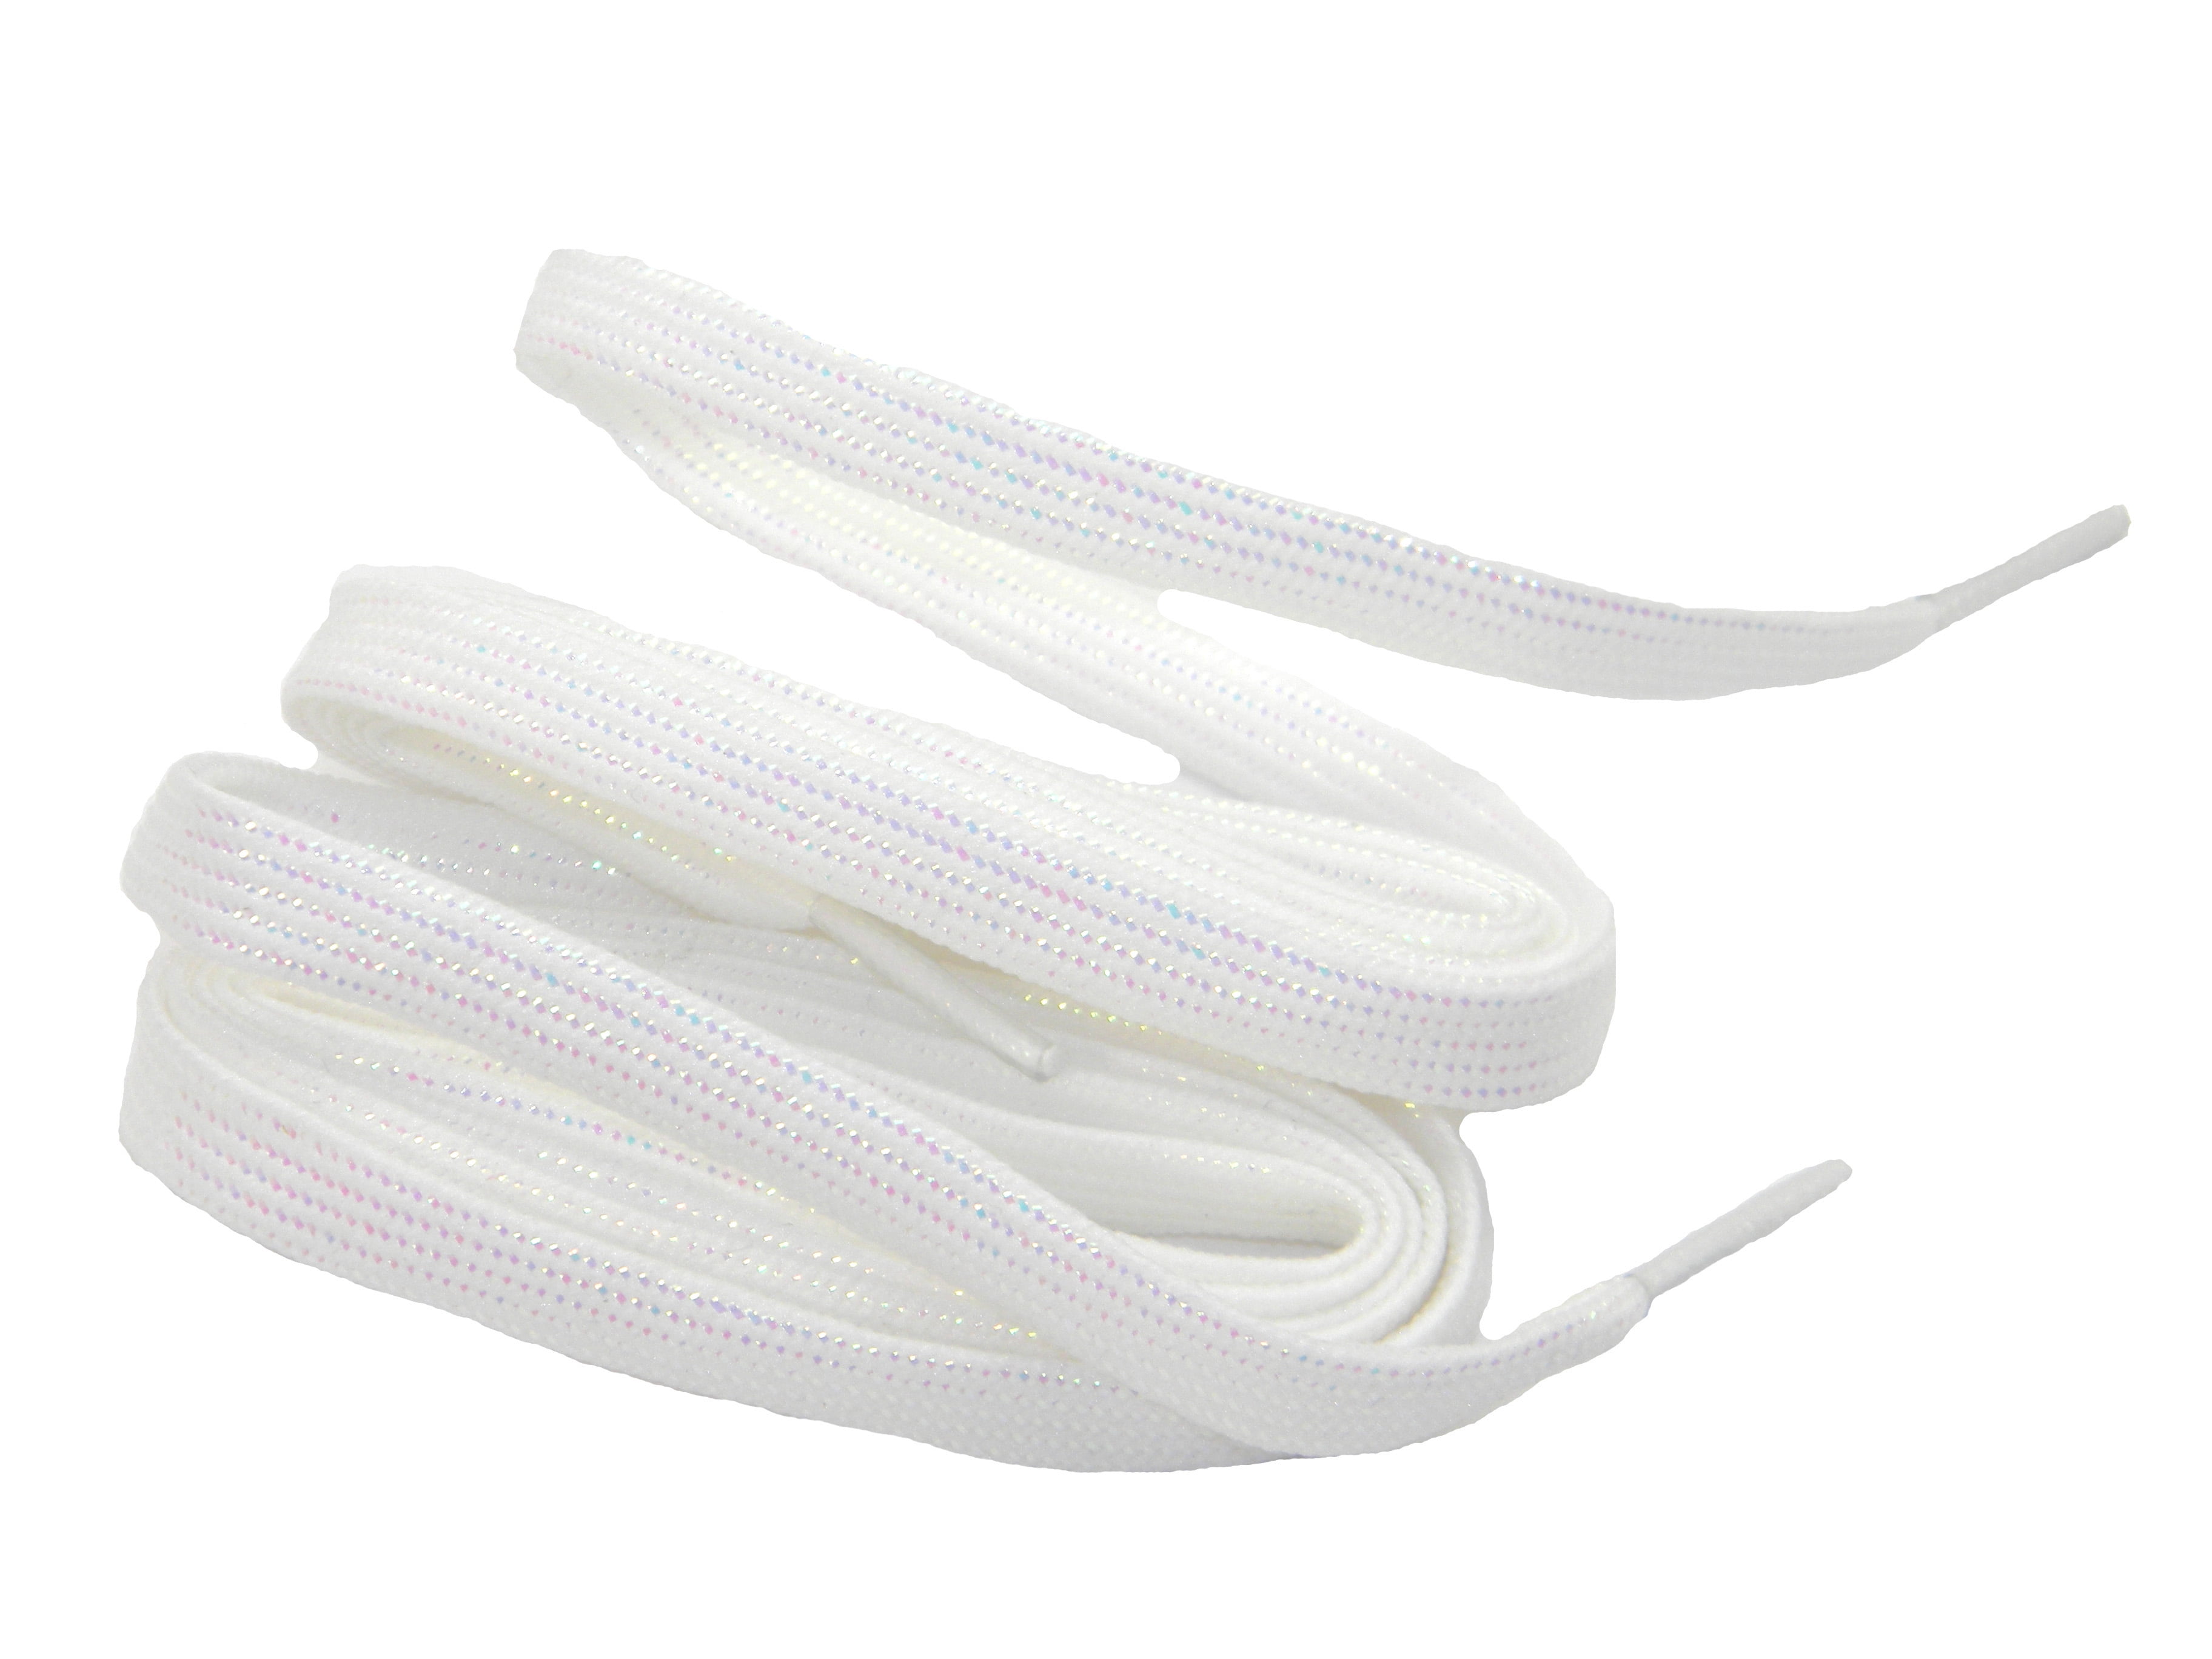 2 PAIRs ROUND Athletic Sports Sneaker Shoelace Strings 40 Inch Lace 